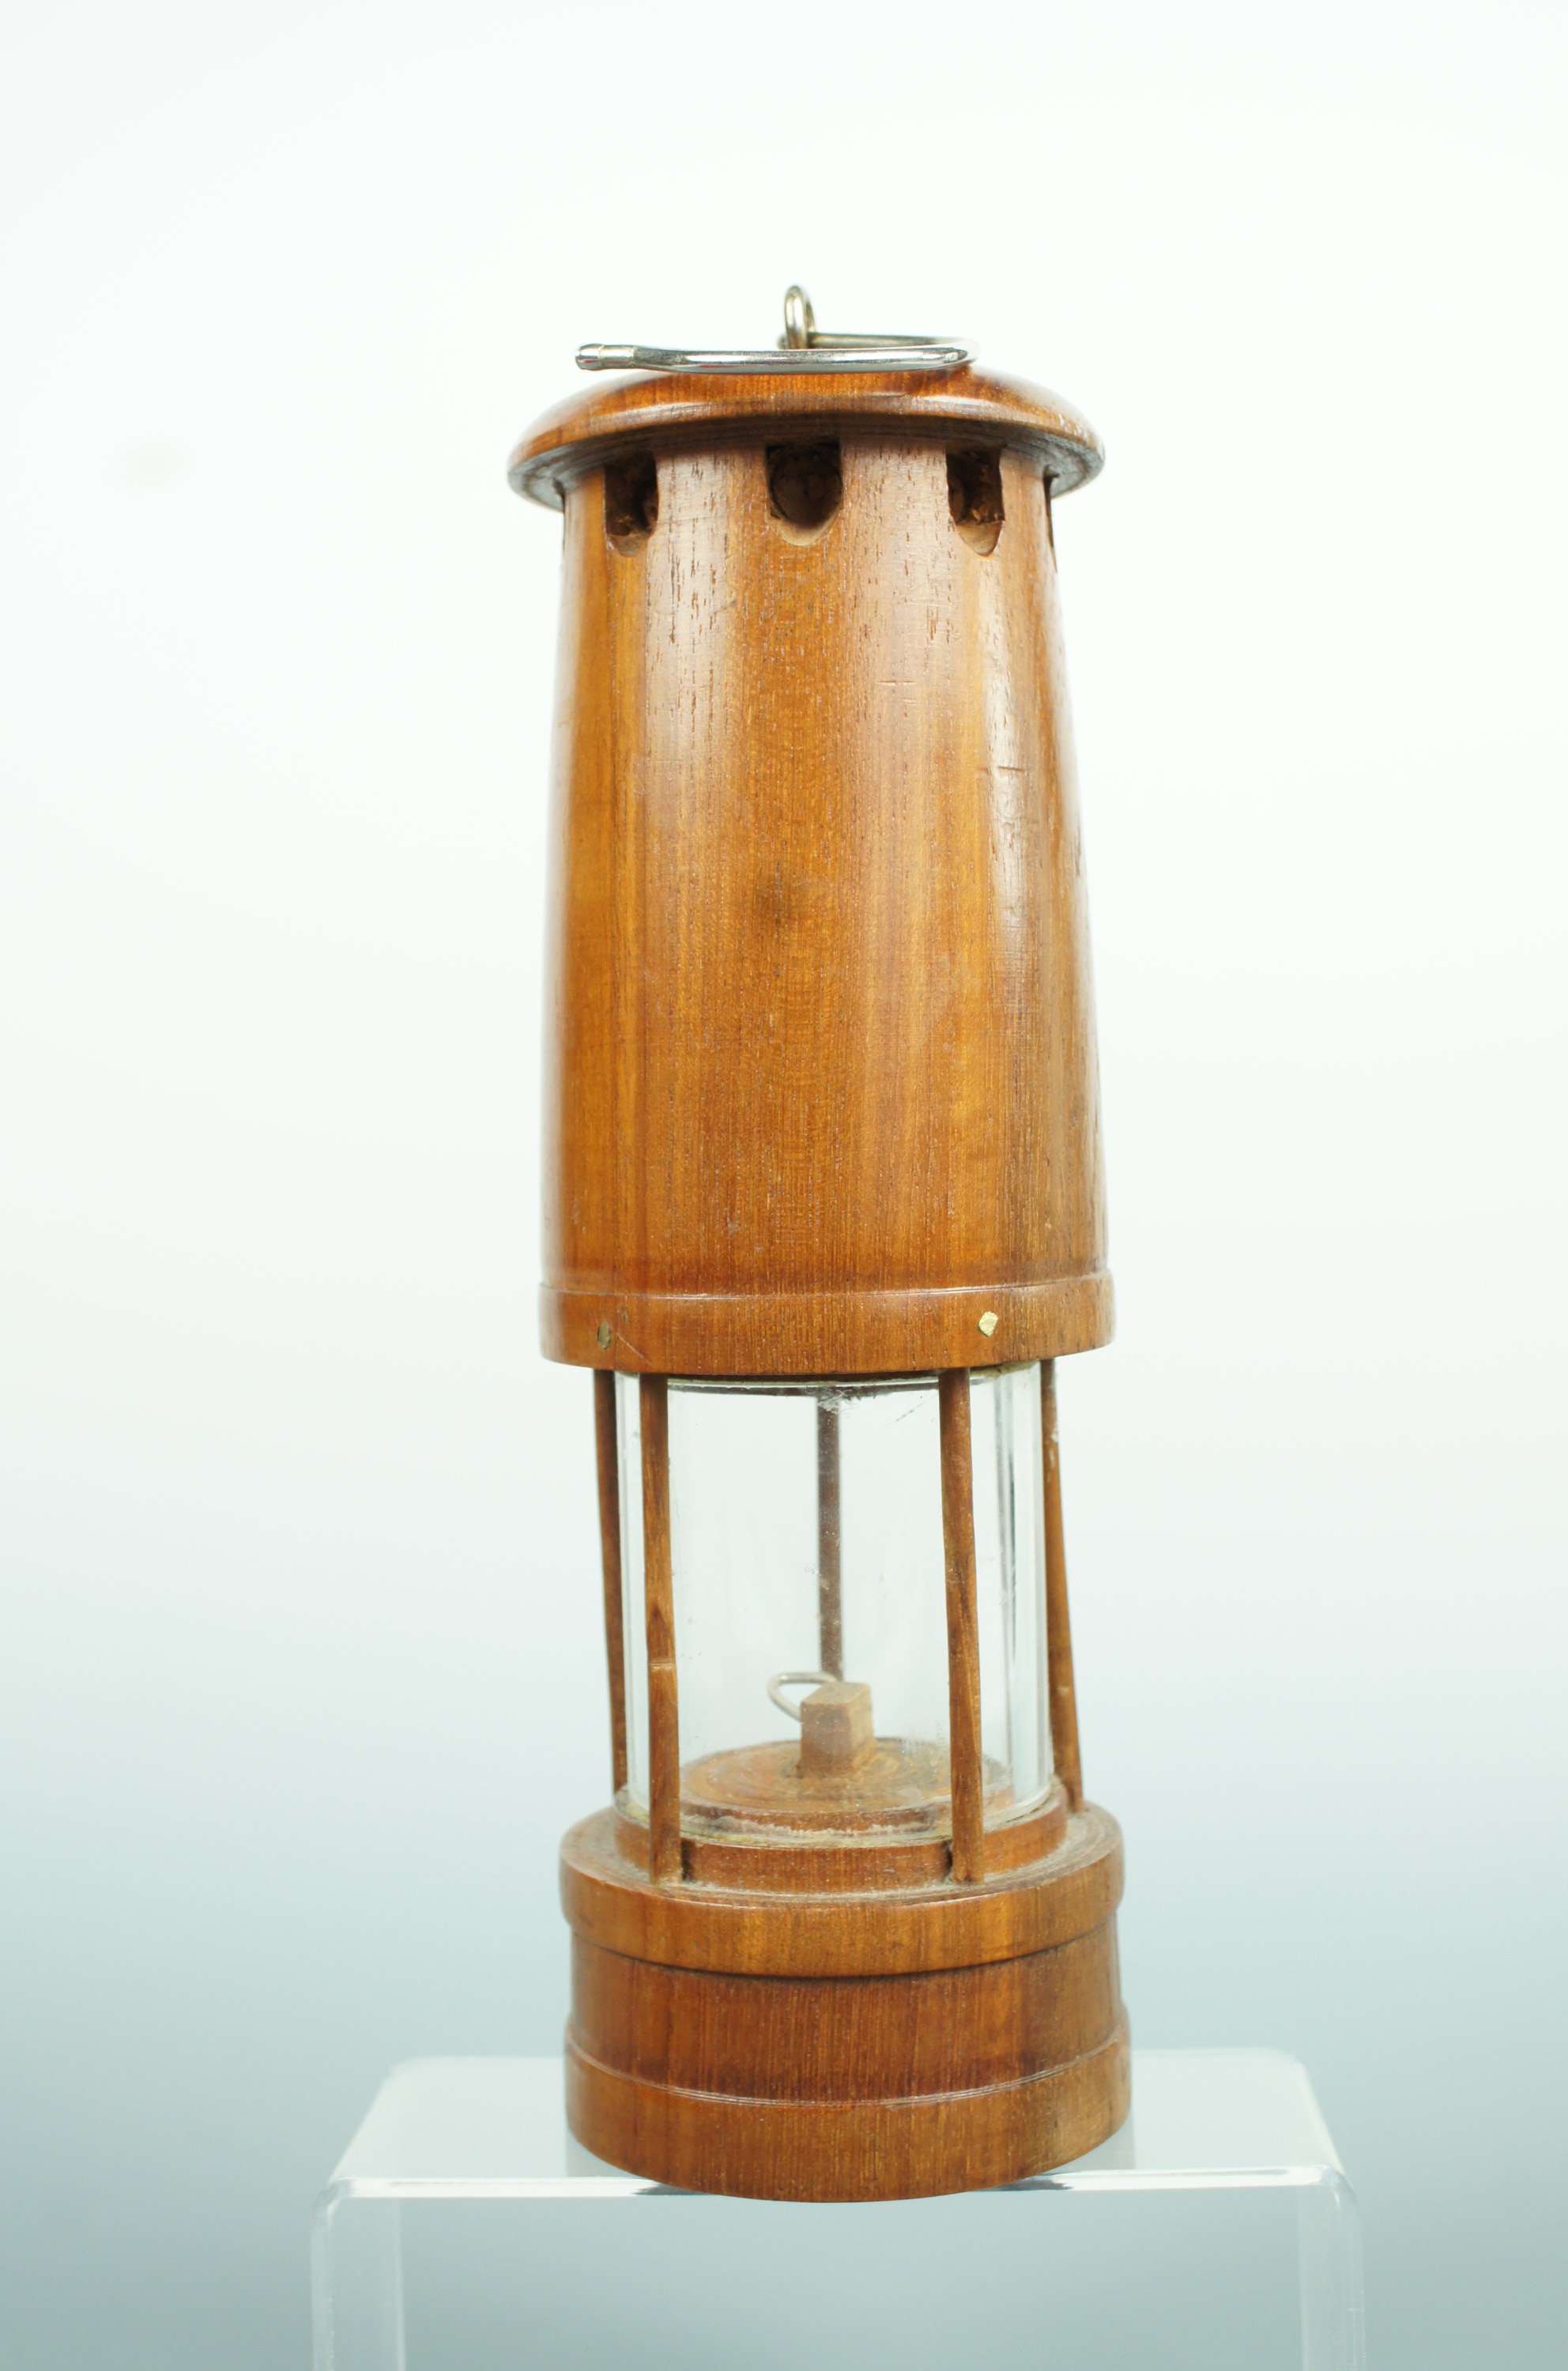 A model miner's safety lamp turned from Malabar teak salvaged from HMS Trincomalee, 24 cm